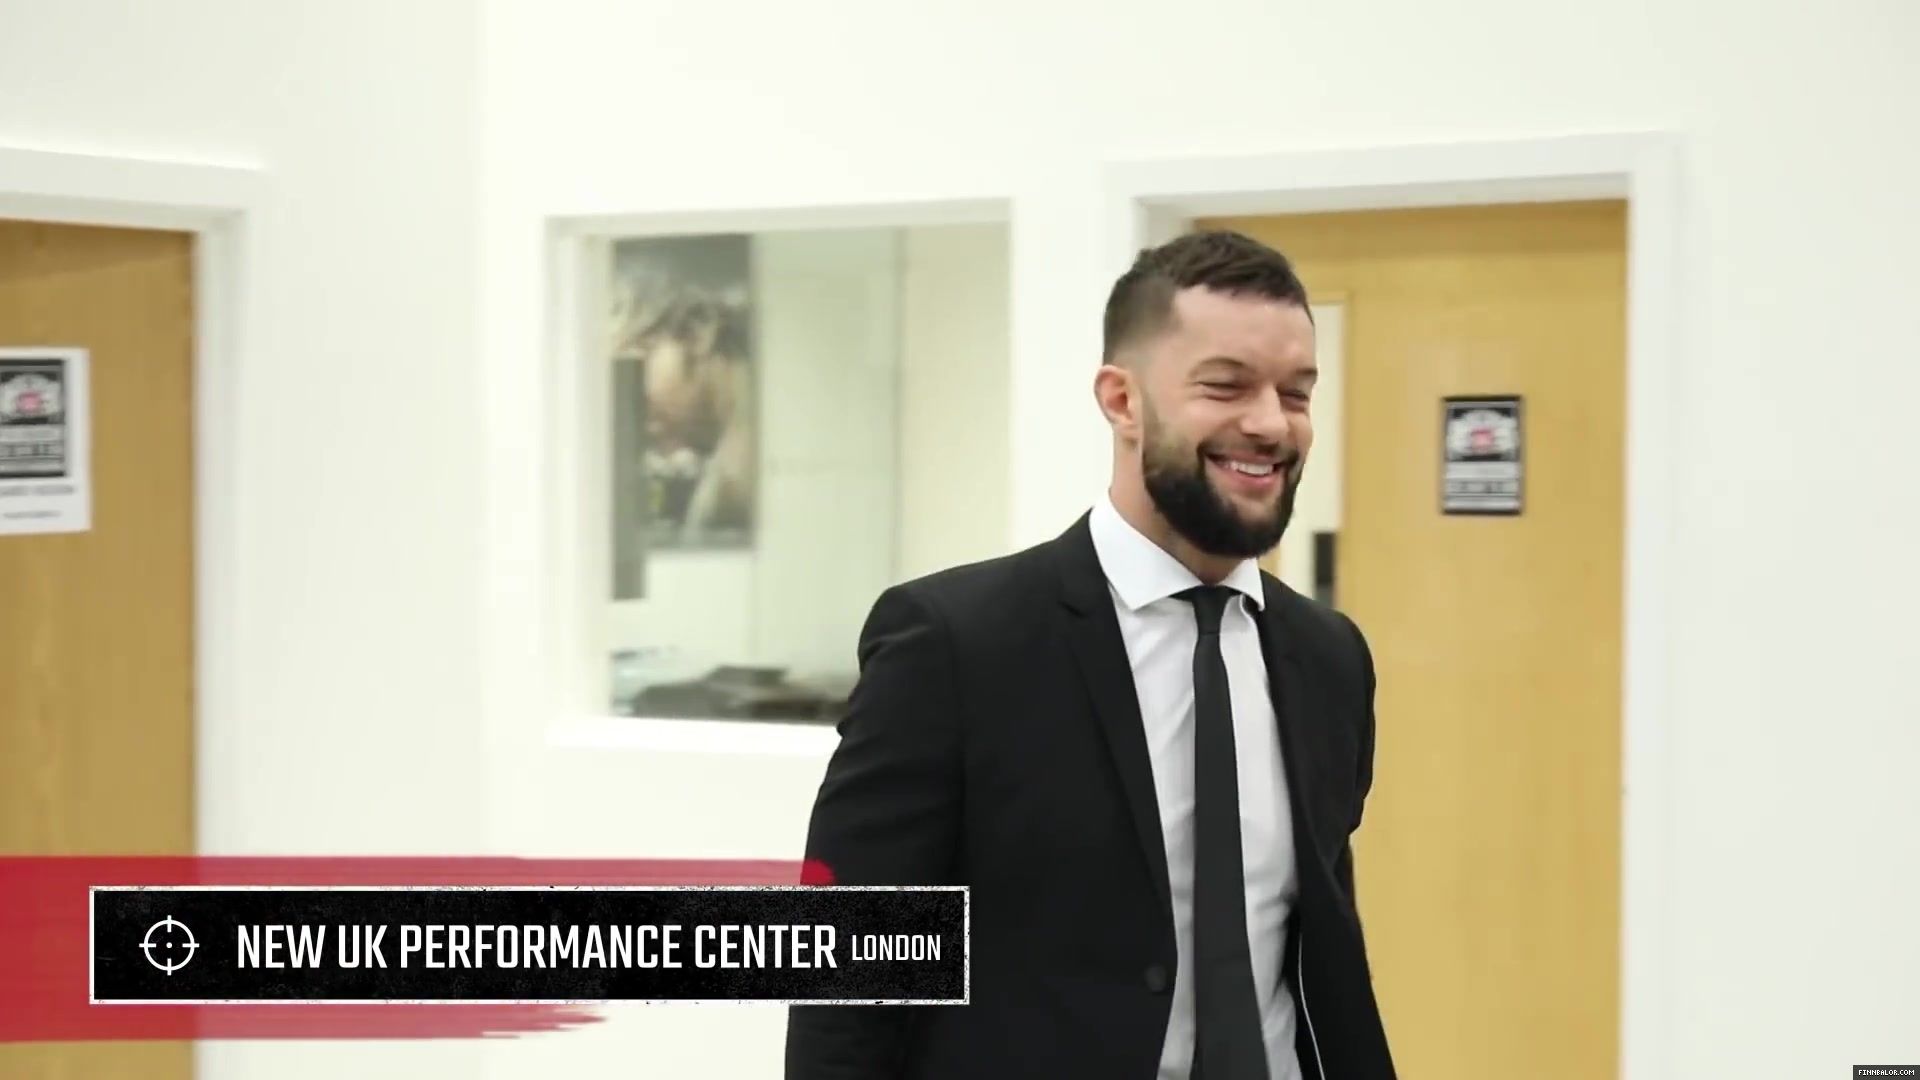 WWE_Superstar_FINN_BALOR_joins_MOUSTACHE_MOUNTAIN_at_the_opening_of_the_NXT_UK_PC_014.jpg